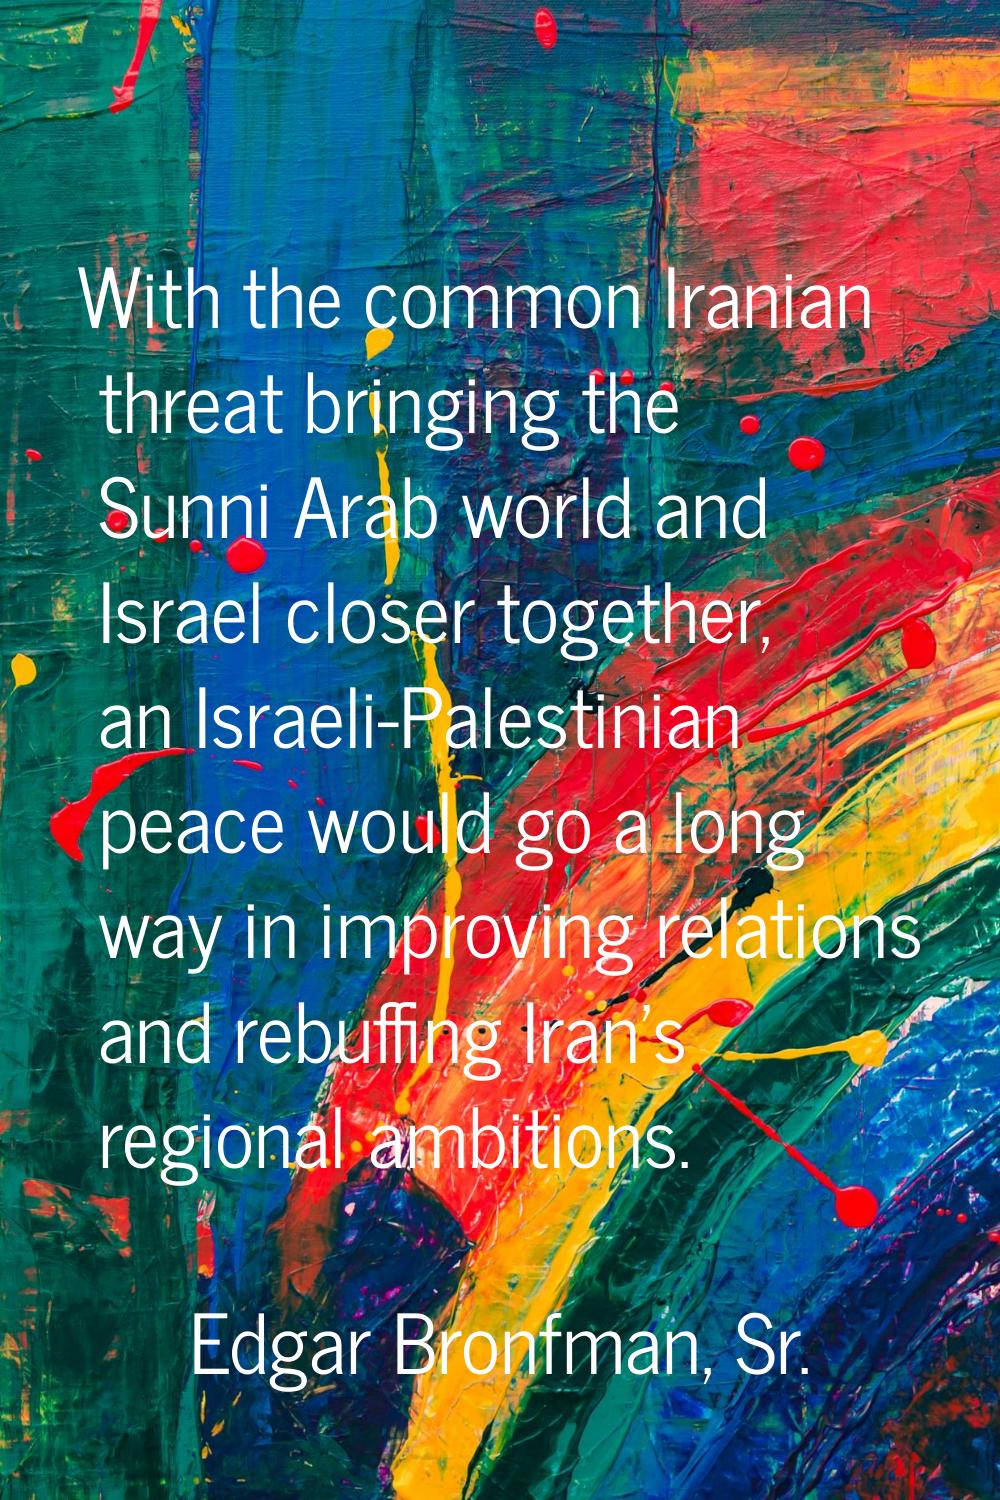 With the common Iranian threat bringing the Sunni Arab world and Israel closer together, an Israeli